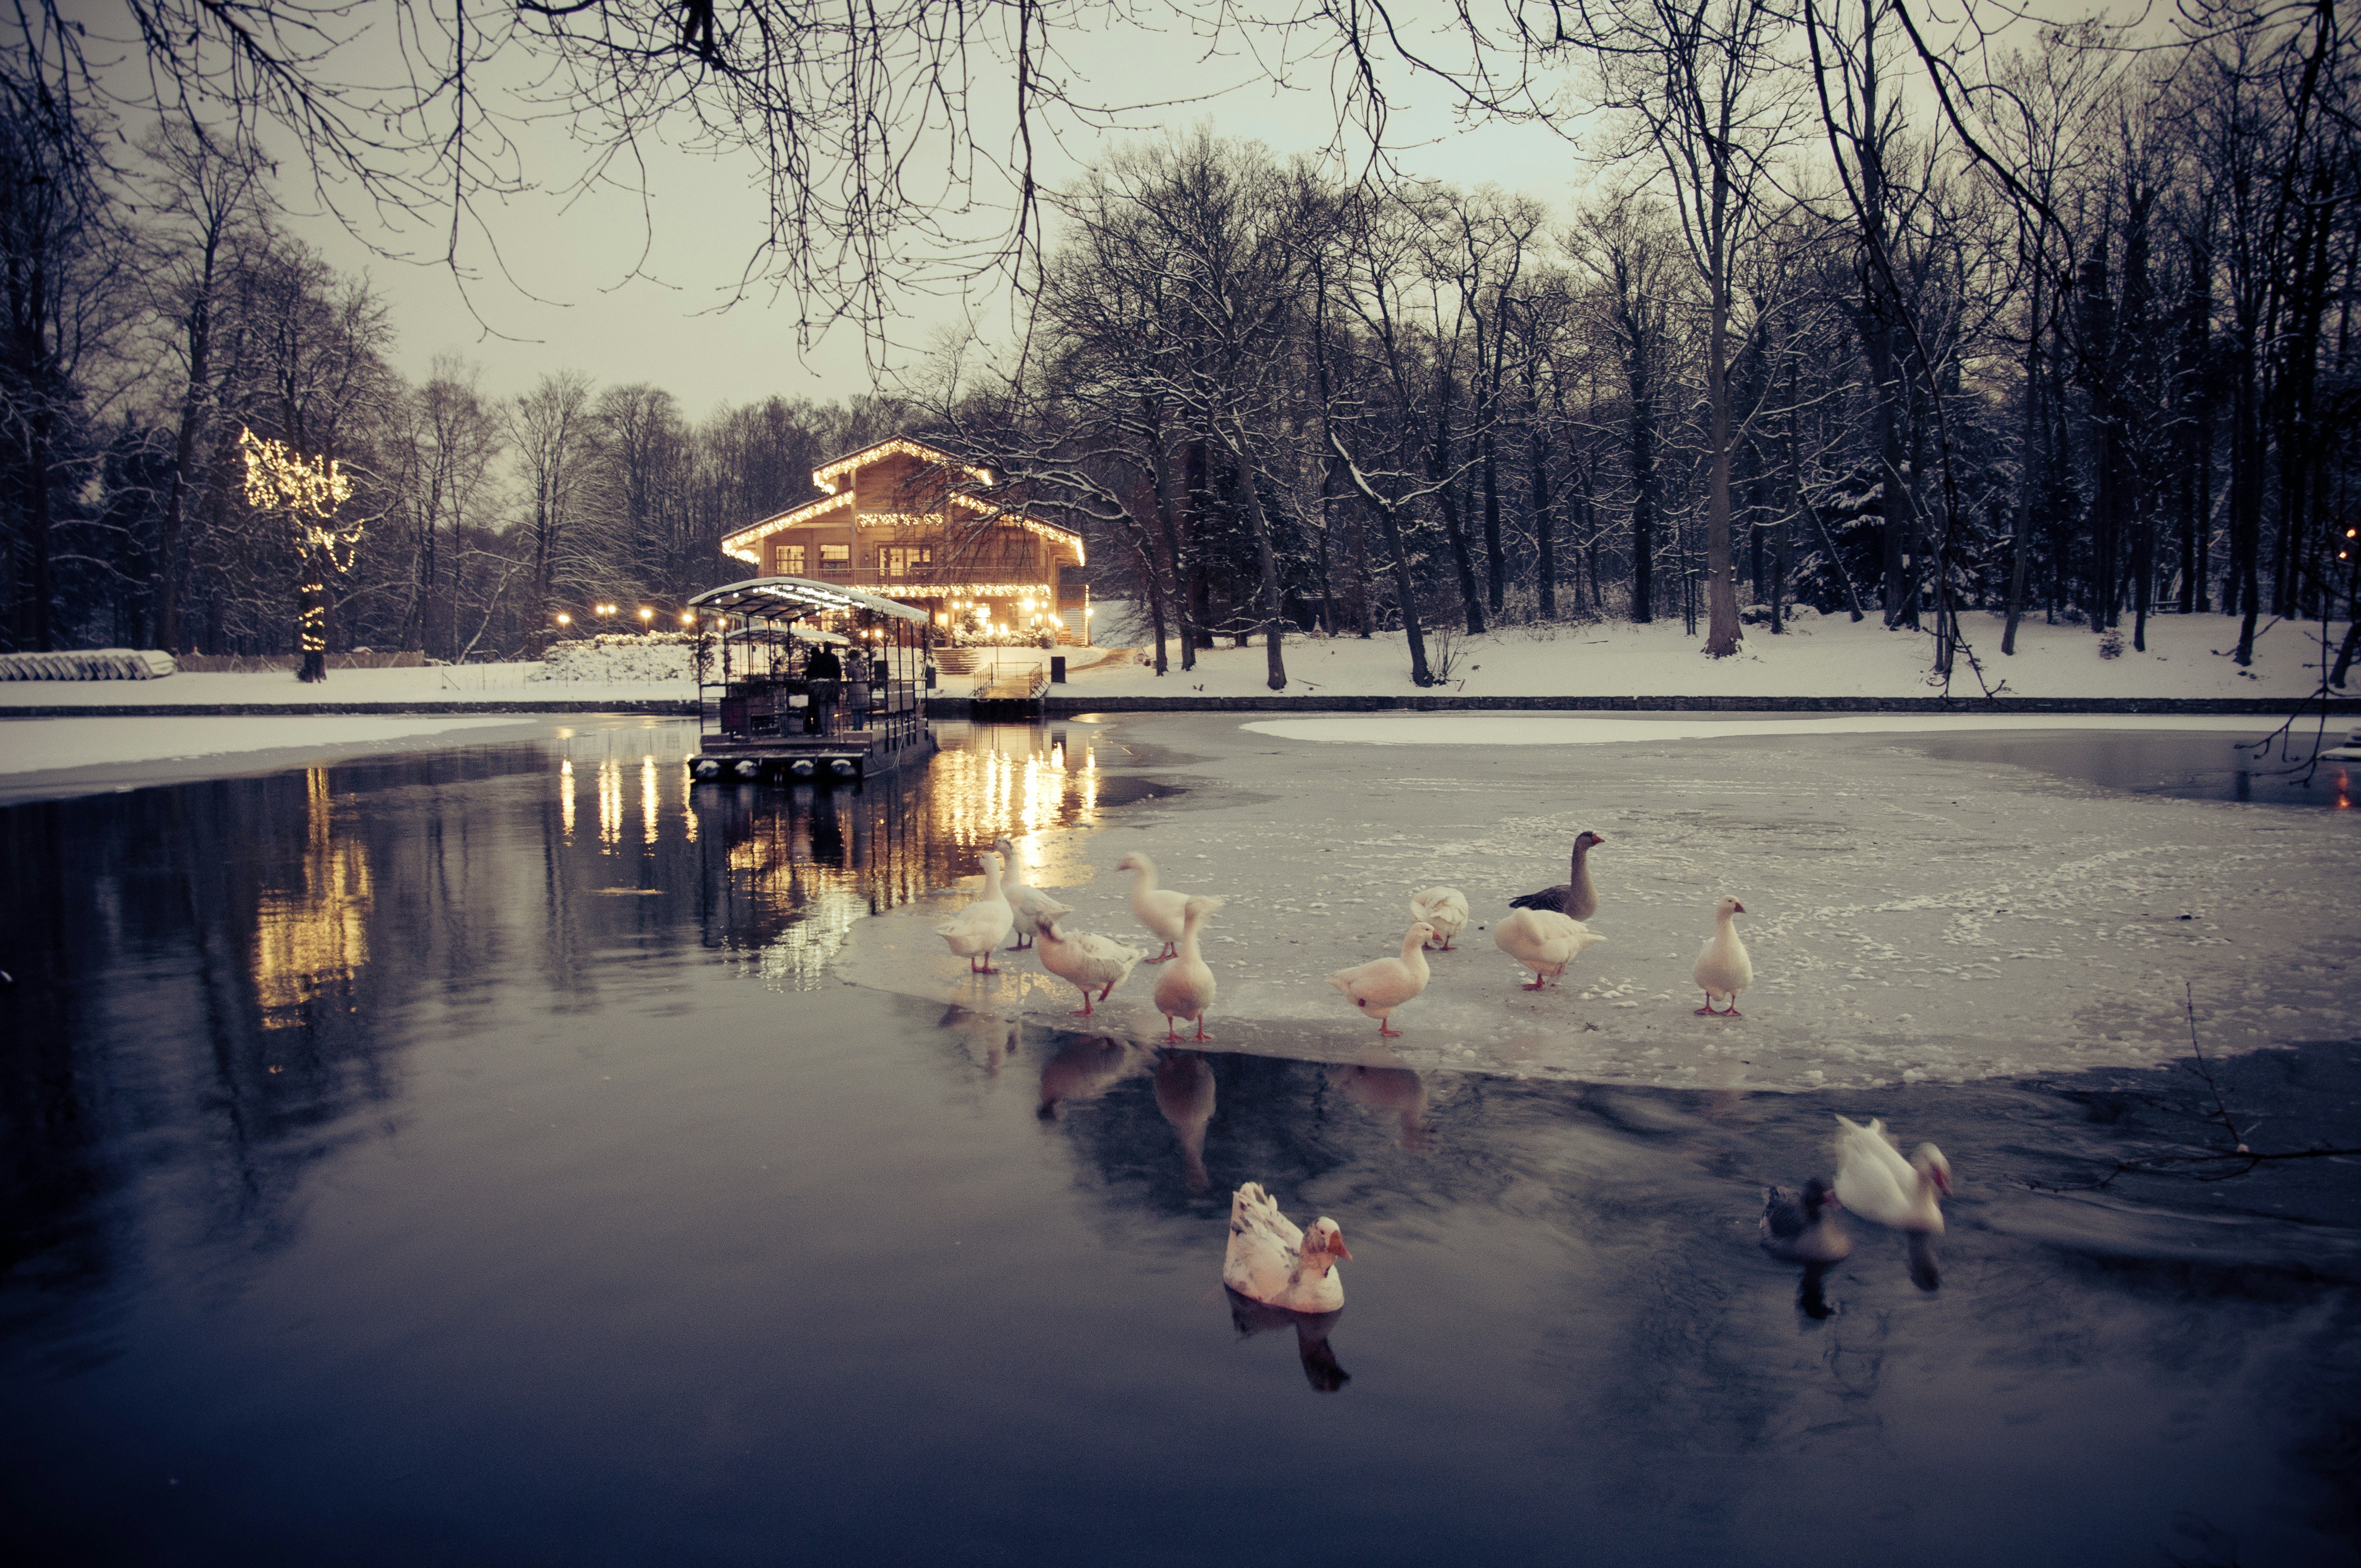 White ducks stand on a frozen section of a pond in front of the Chalet Robinson covered in snow. The buildings and boat dock and one tree are lit with the warm yellow glow of Christmas lights